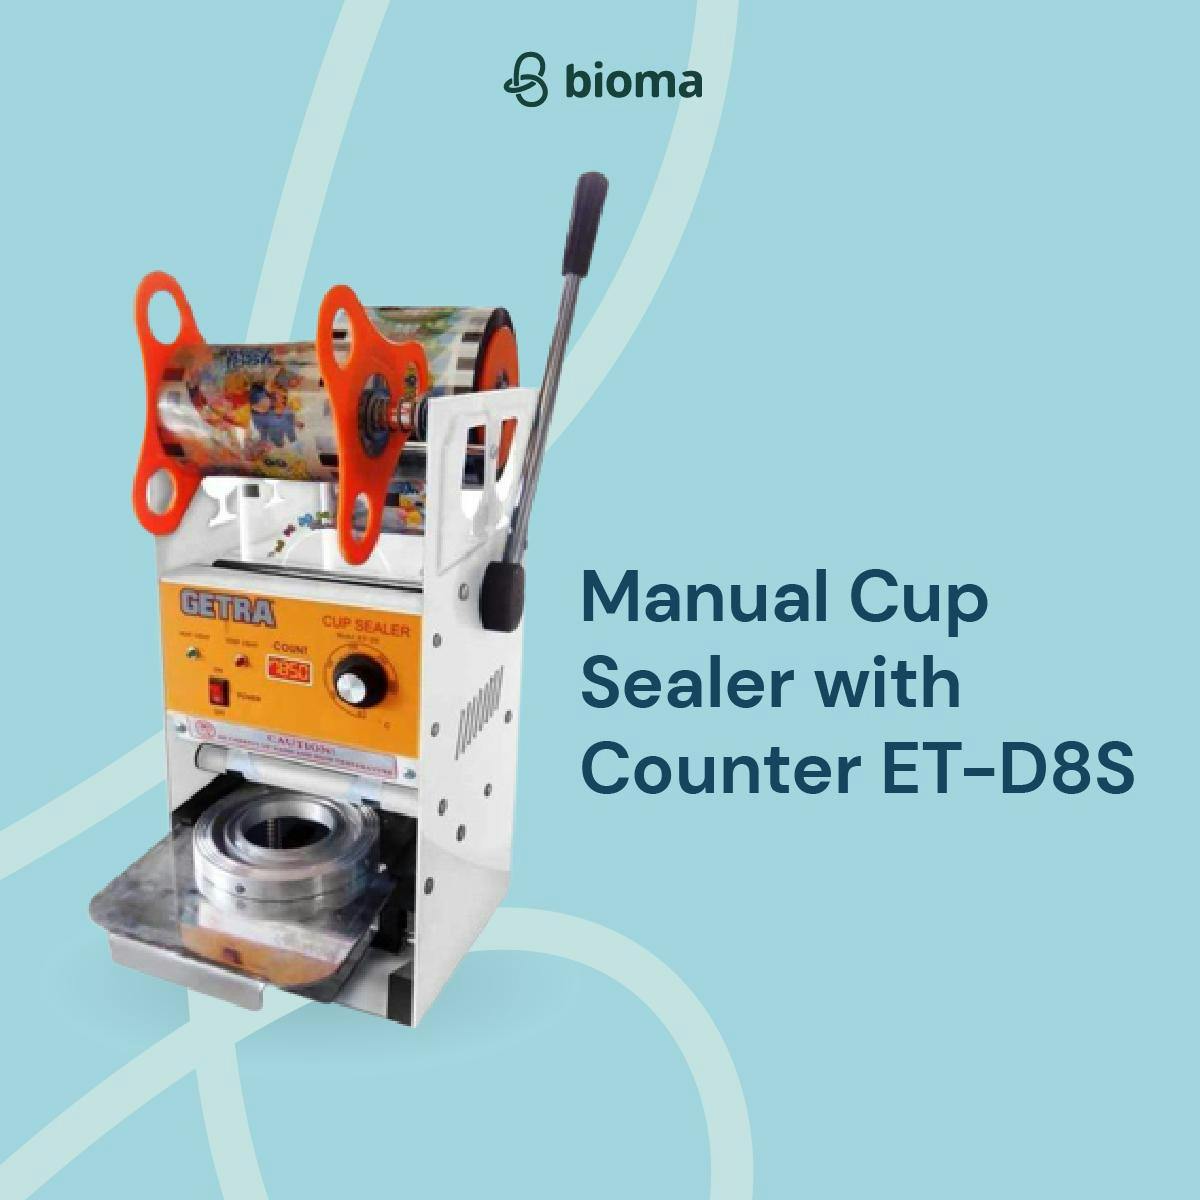 Manual Cup Sealer with Counter ET-D8S